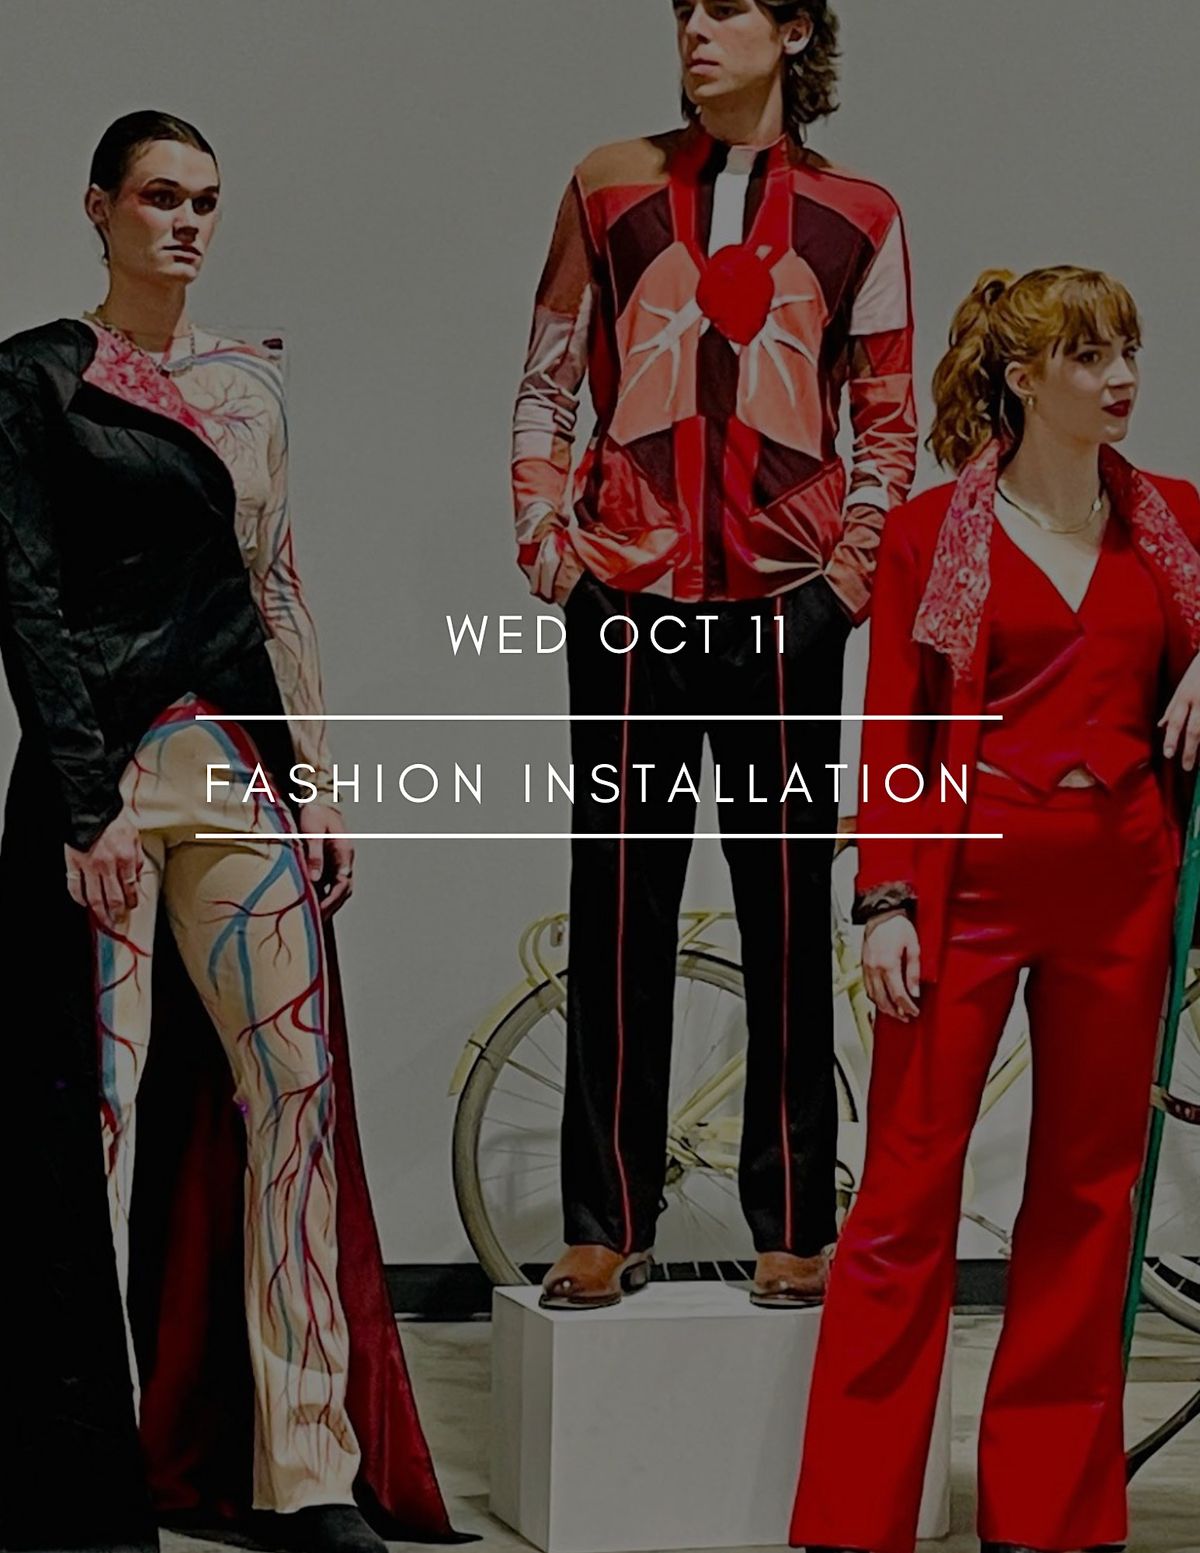 House Fashion Week - The Installation Show